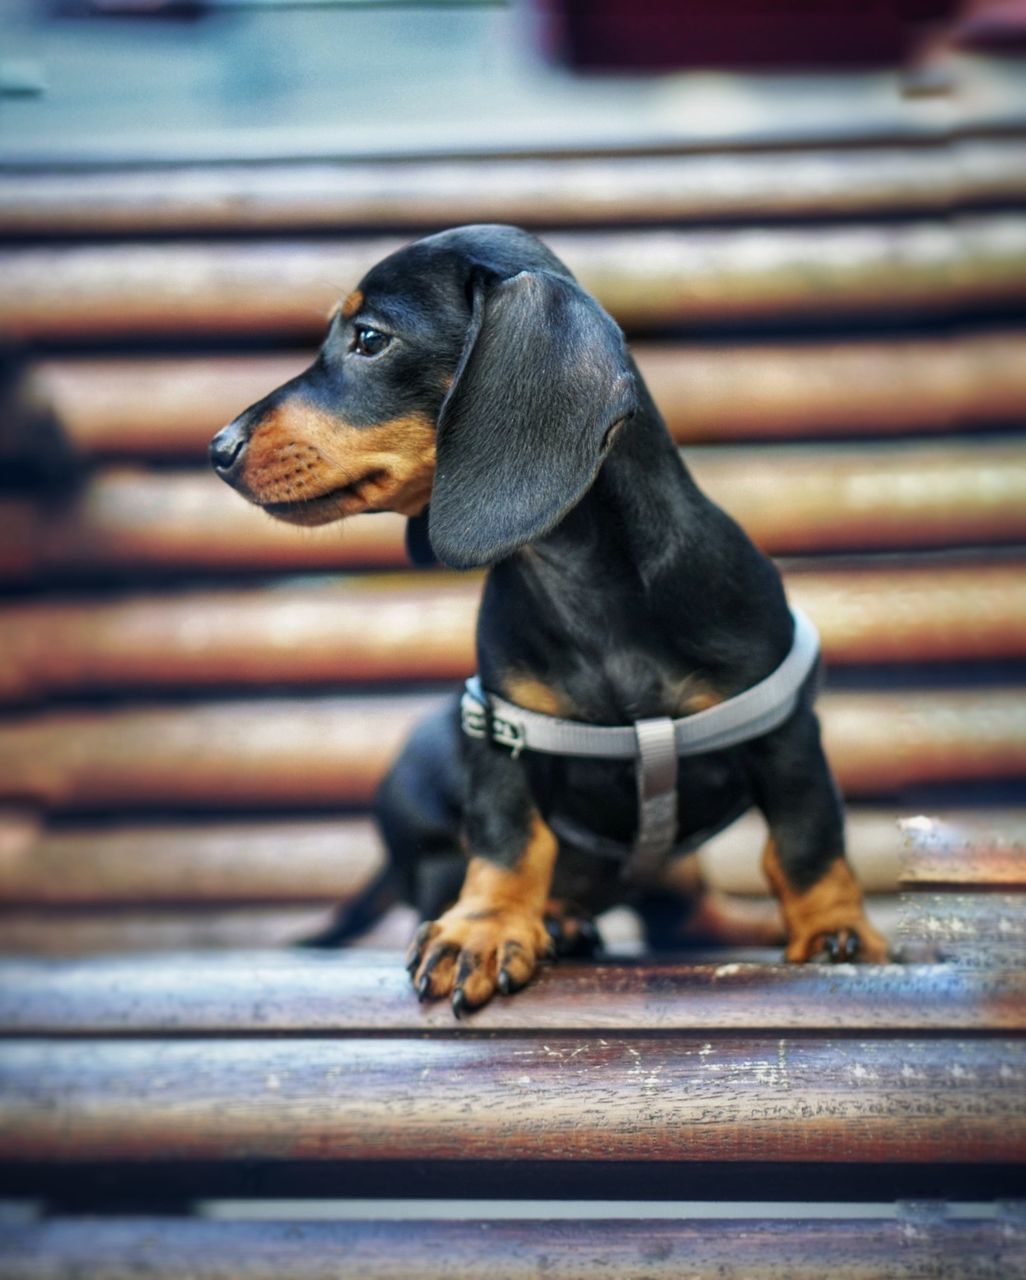 animal themes, animal, one animal, canine, dog, mammal, pet, dachshund, domestic animals, no people, blue, hound, looking, looking away, day, puppy, sitting, wood, focus on foreground